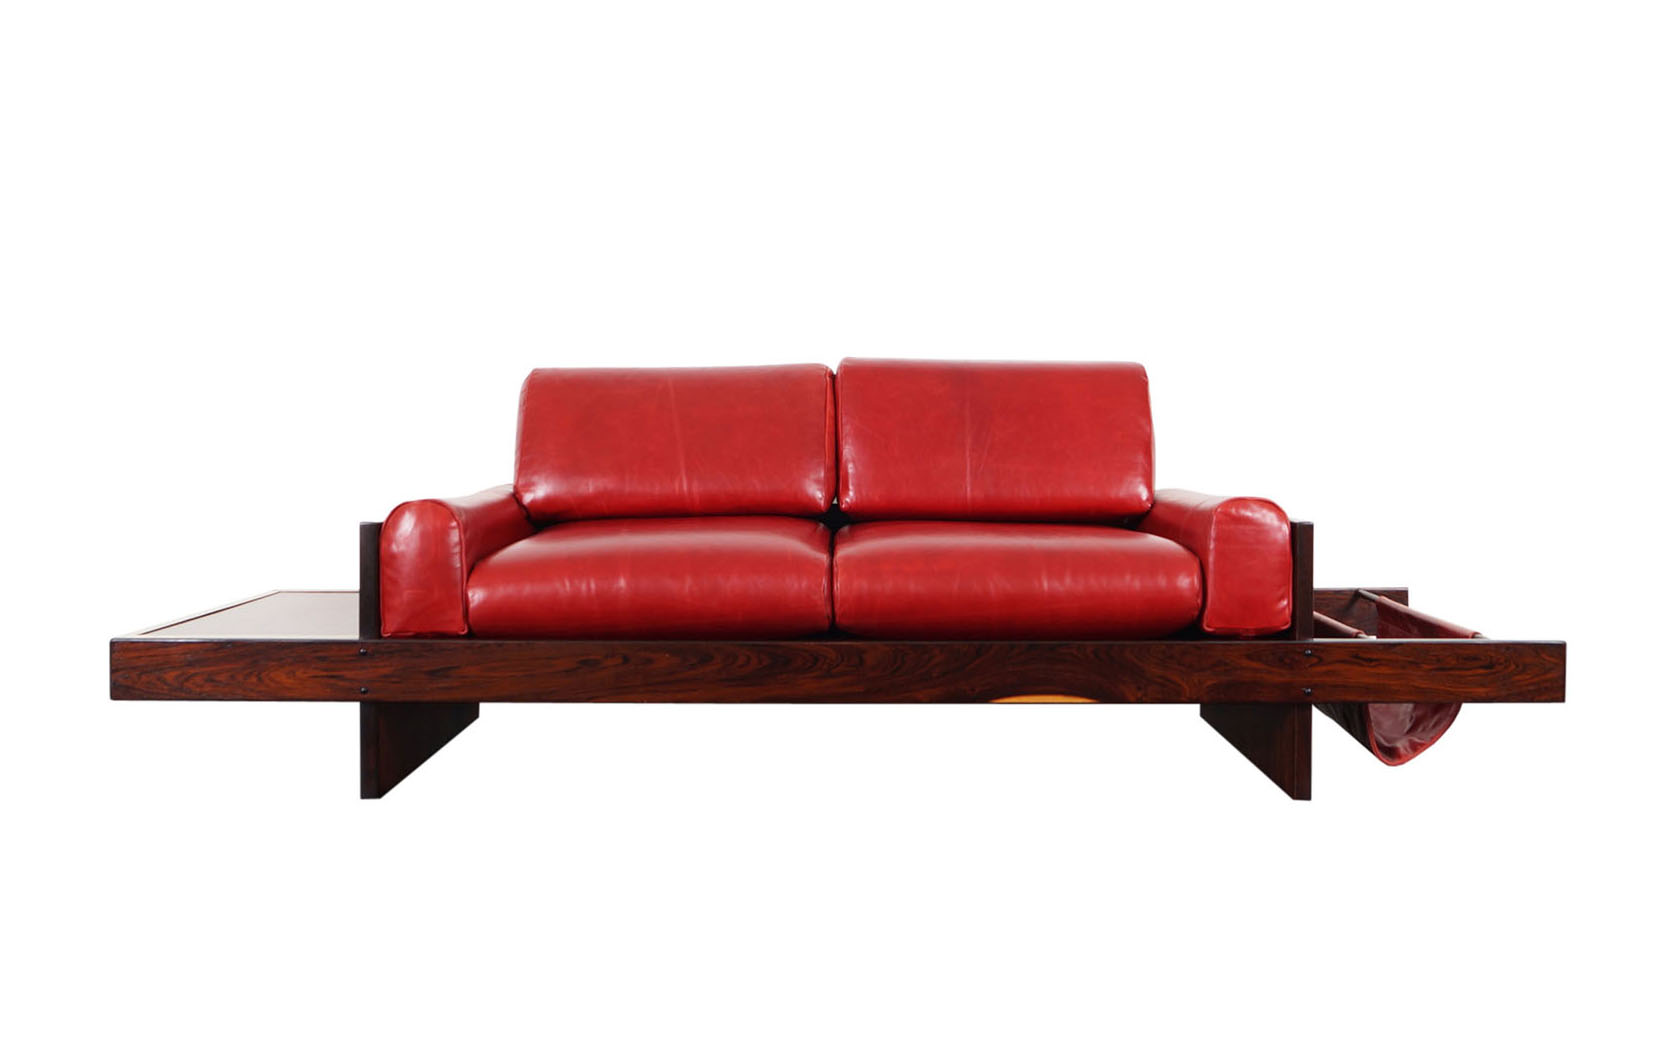 Brazilian Rosewood & Leather Sofa Attributed to Celina Moveis